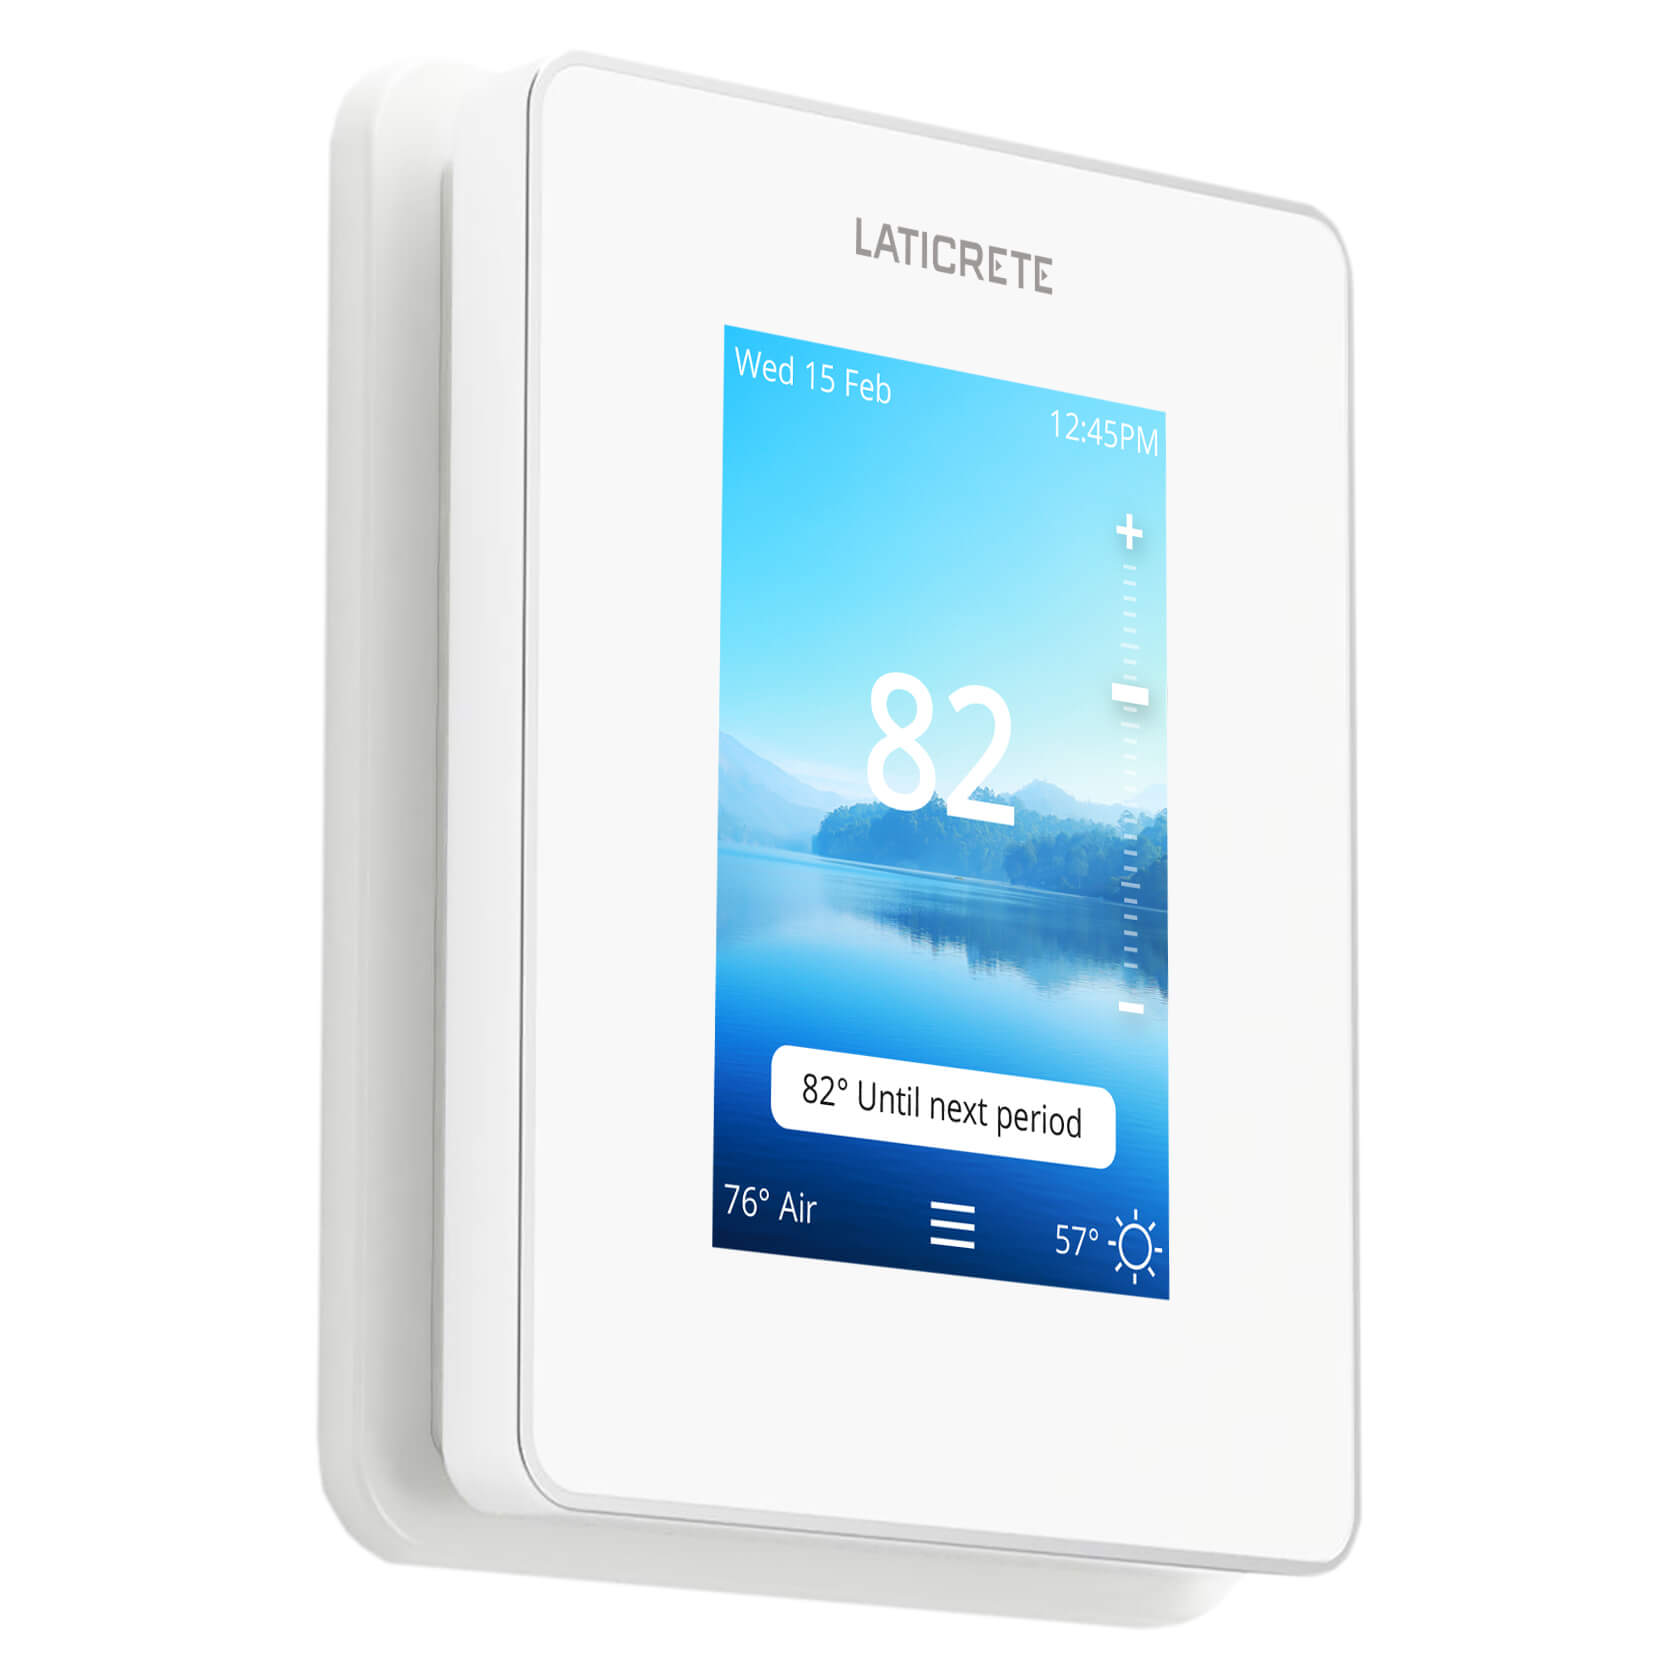 Install a touch screen thermostat for your radiant system